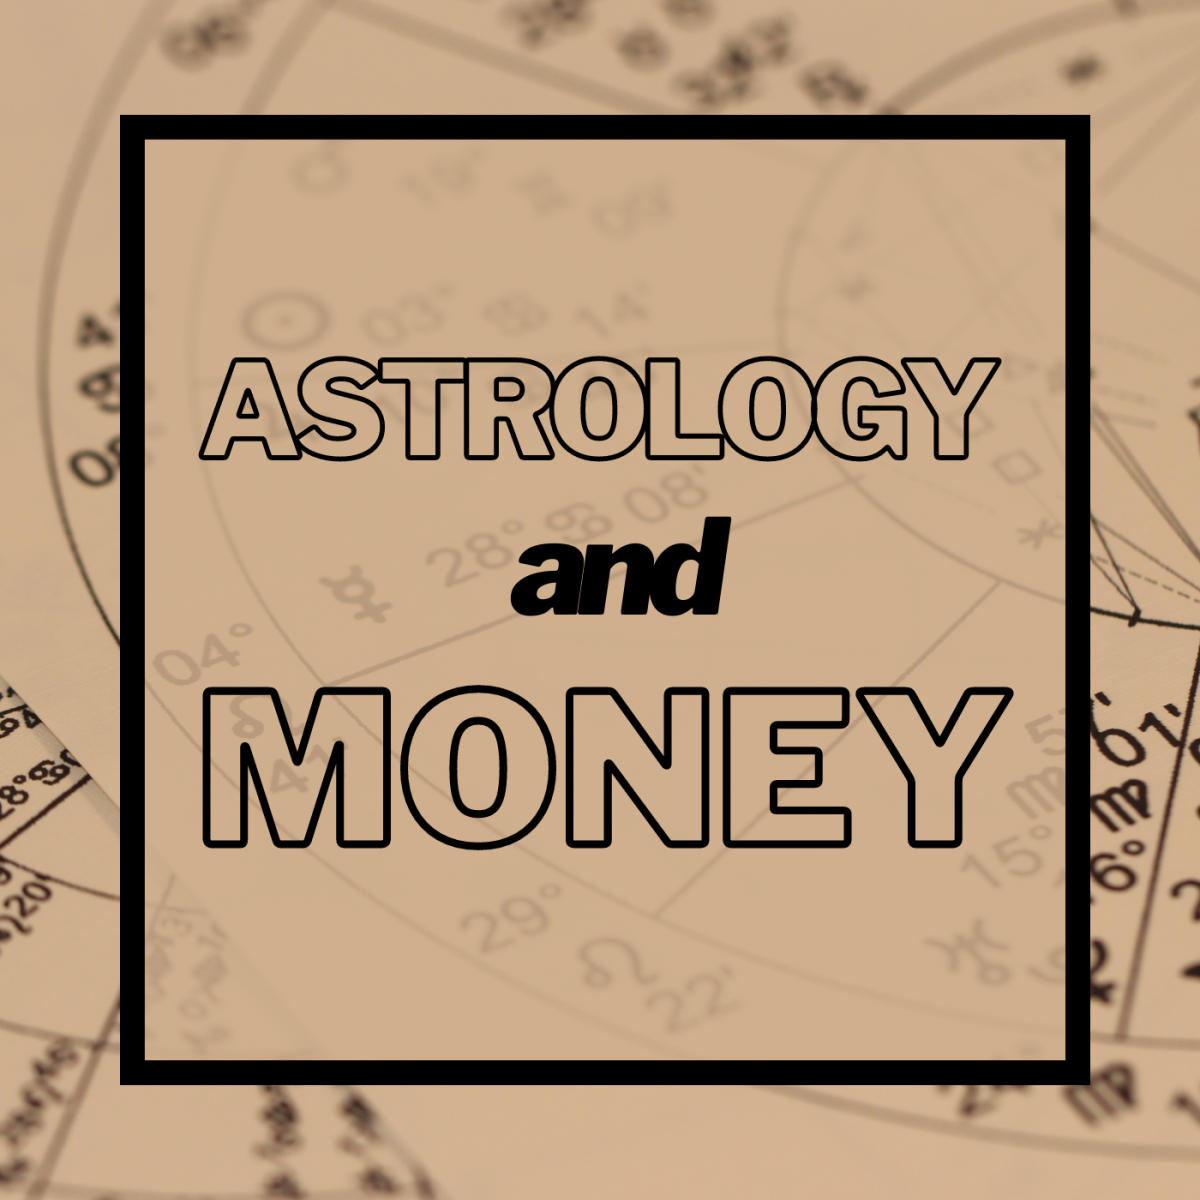 Everything you want to know about astrological signs and money.